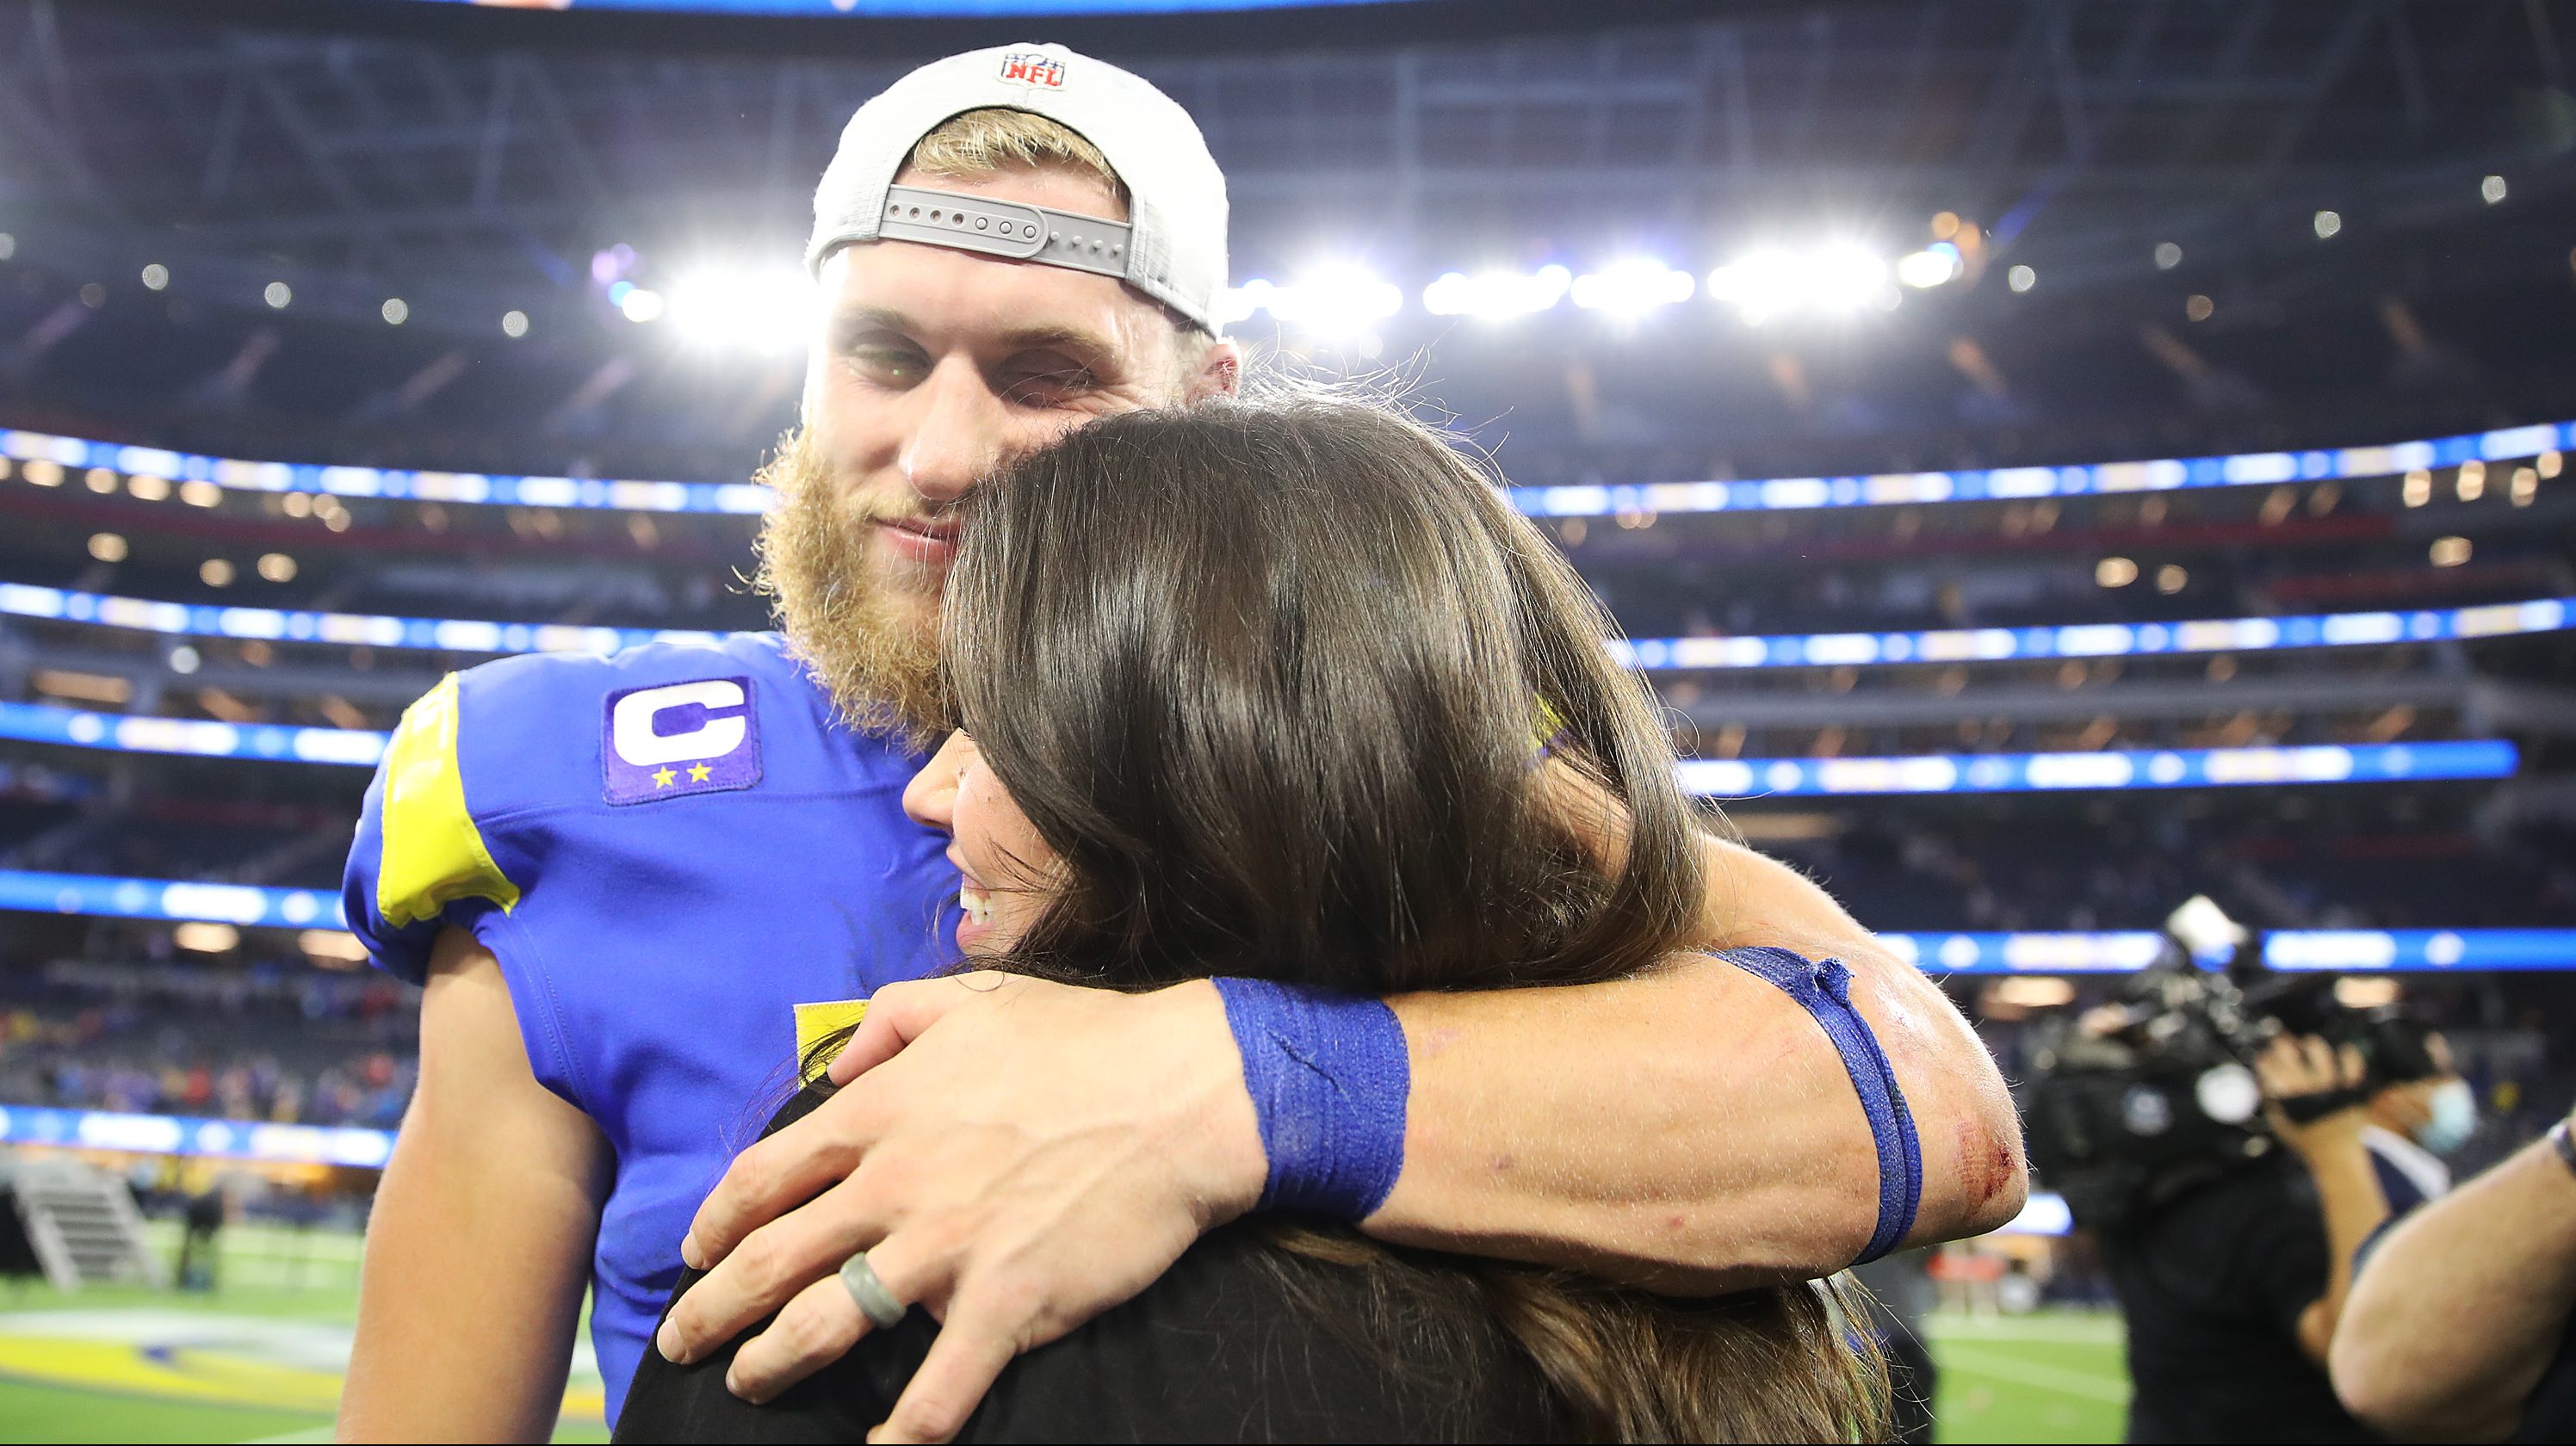 Video of Cooper Kupp & Wife Anna's Celebration Goes Viral